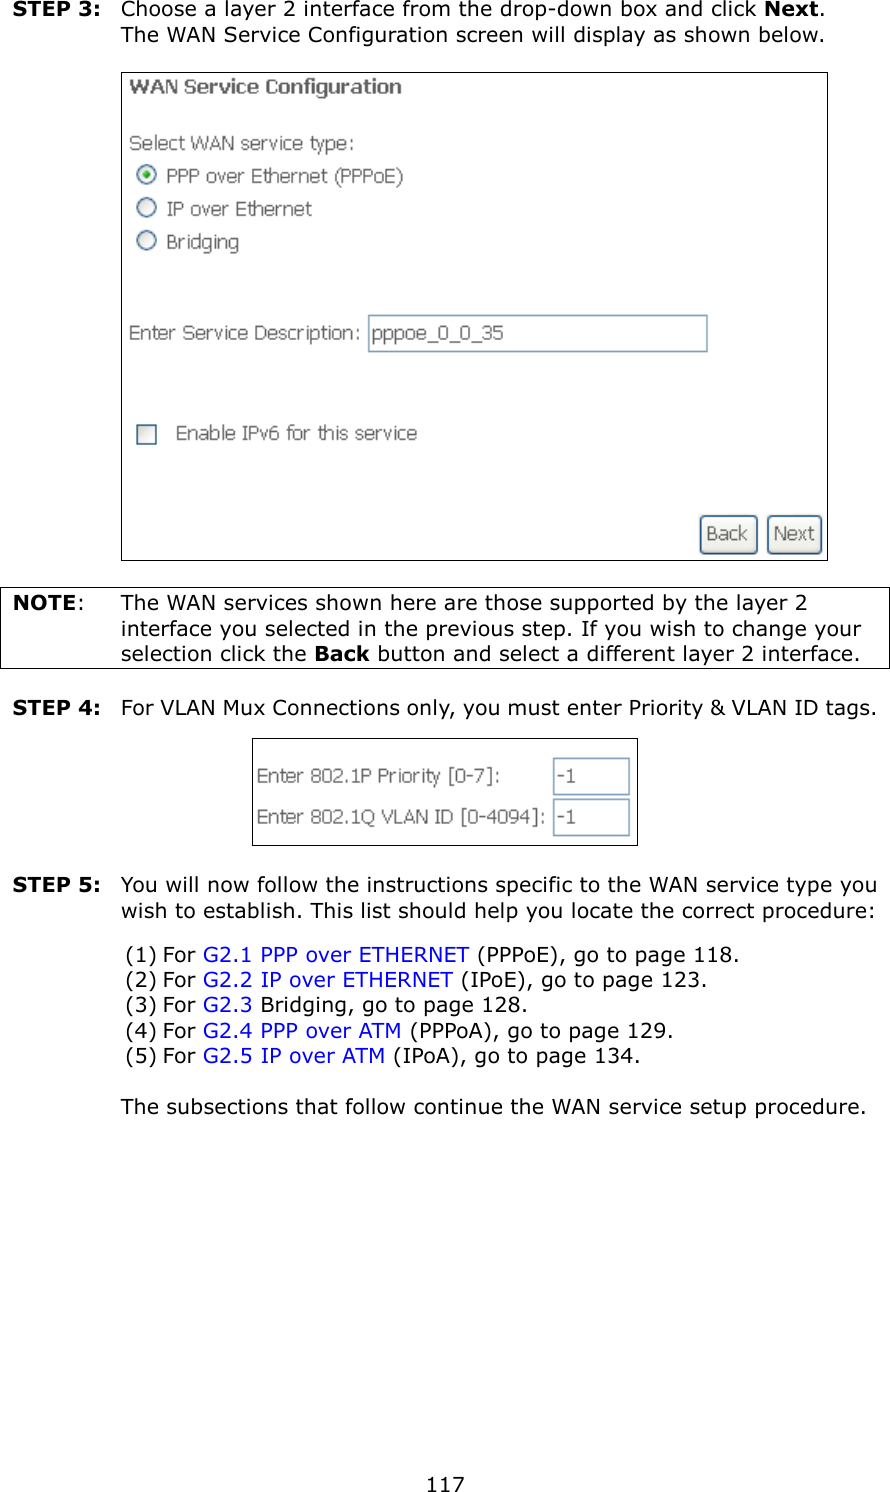   117 STEP 3:  Choose a layer 2 interface from the drop-down box and click Next.   The WAN Service Configuration screen will display as shown below.     NOTE:  The WAN services shown here are those supported by the layer 2 interface you selected in the previous step. If you wish to change your selection click the Back button and select a different layer 2 interface.  STEP 4:  For VLAN Mux Connections only, you must enter Priority &amp; VLAN ID tags.   STEP 5:  You will now follow the instructions specific to the WAN service type you wish to establish. This list should help you locate the correct procedure: (1) For G2.1 PPP over ETHERNET (PPPoE), go to page 118. (2) For G2.2 IP over ETHERNET (IPoE), go to page 123. (3) For G2.3 Bridging, go to page 128. (4) For G2.4 PPP over ATM (PPPoA), go to page 129. (5) For G2.5 IP over ATM (IPoA), go to page 134.      The subsections that follow continue the WAN service setup procedure.     